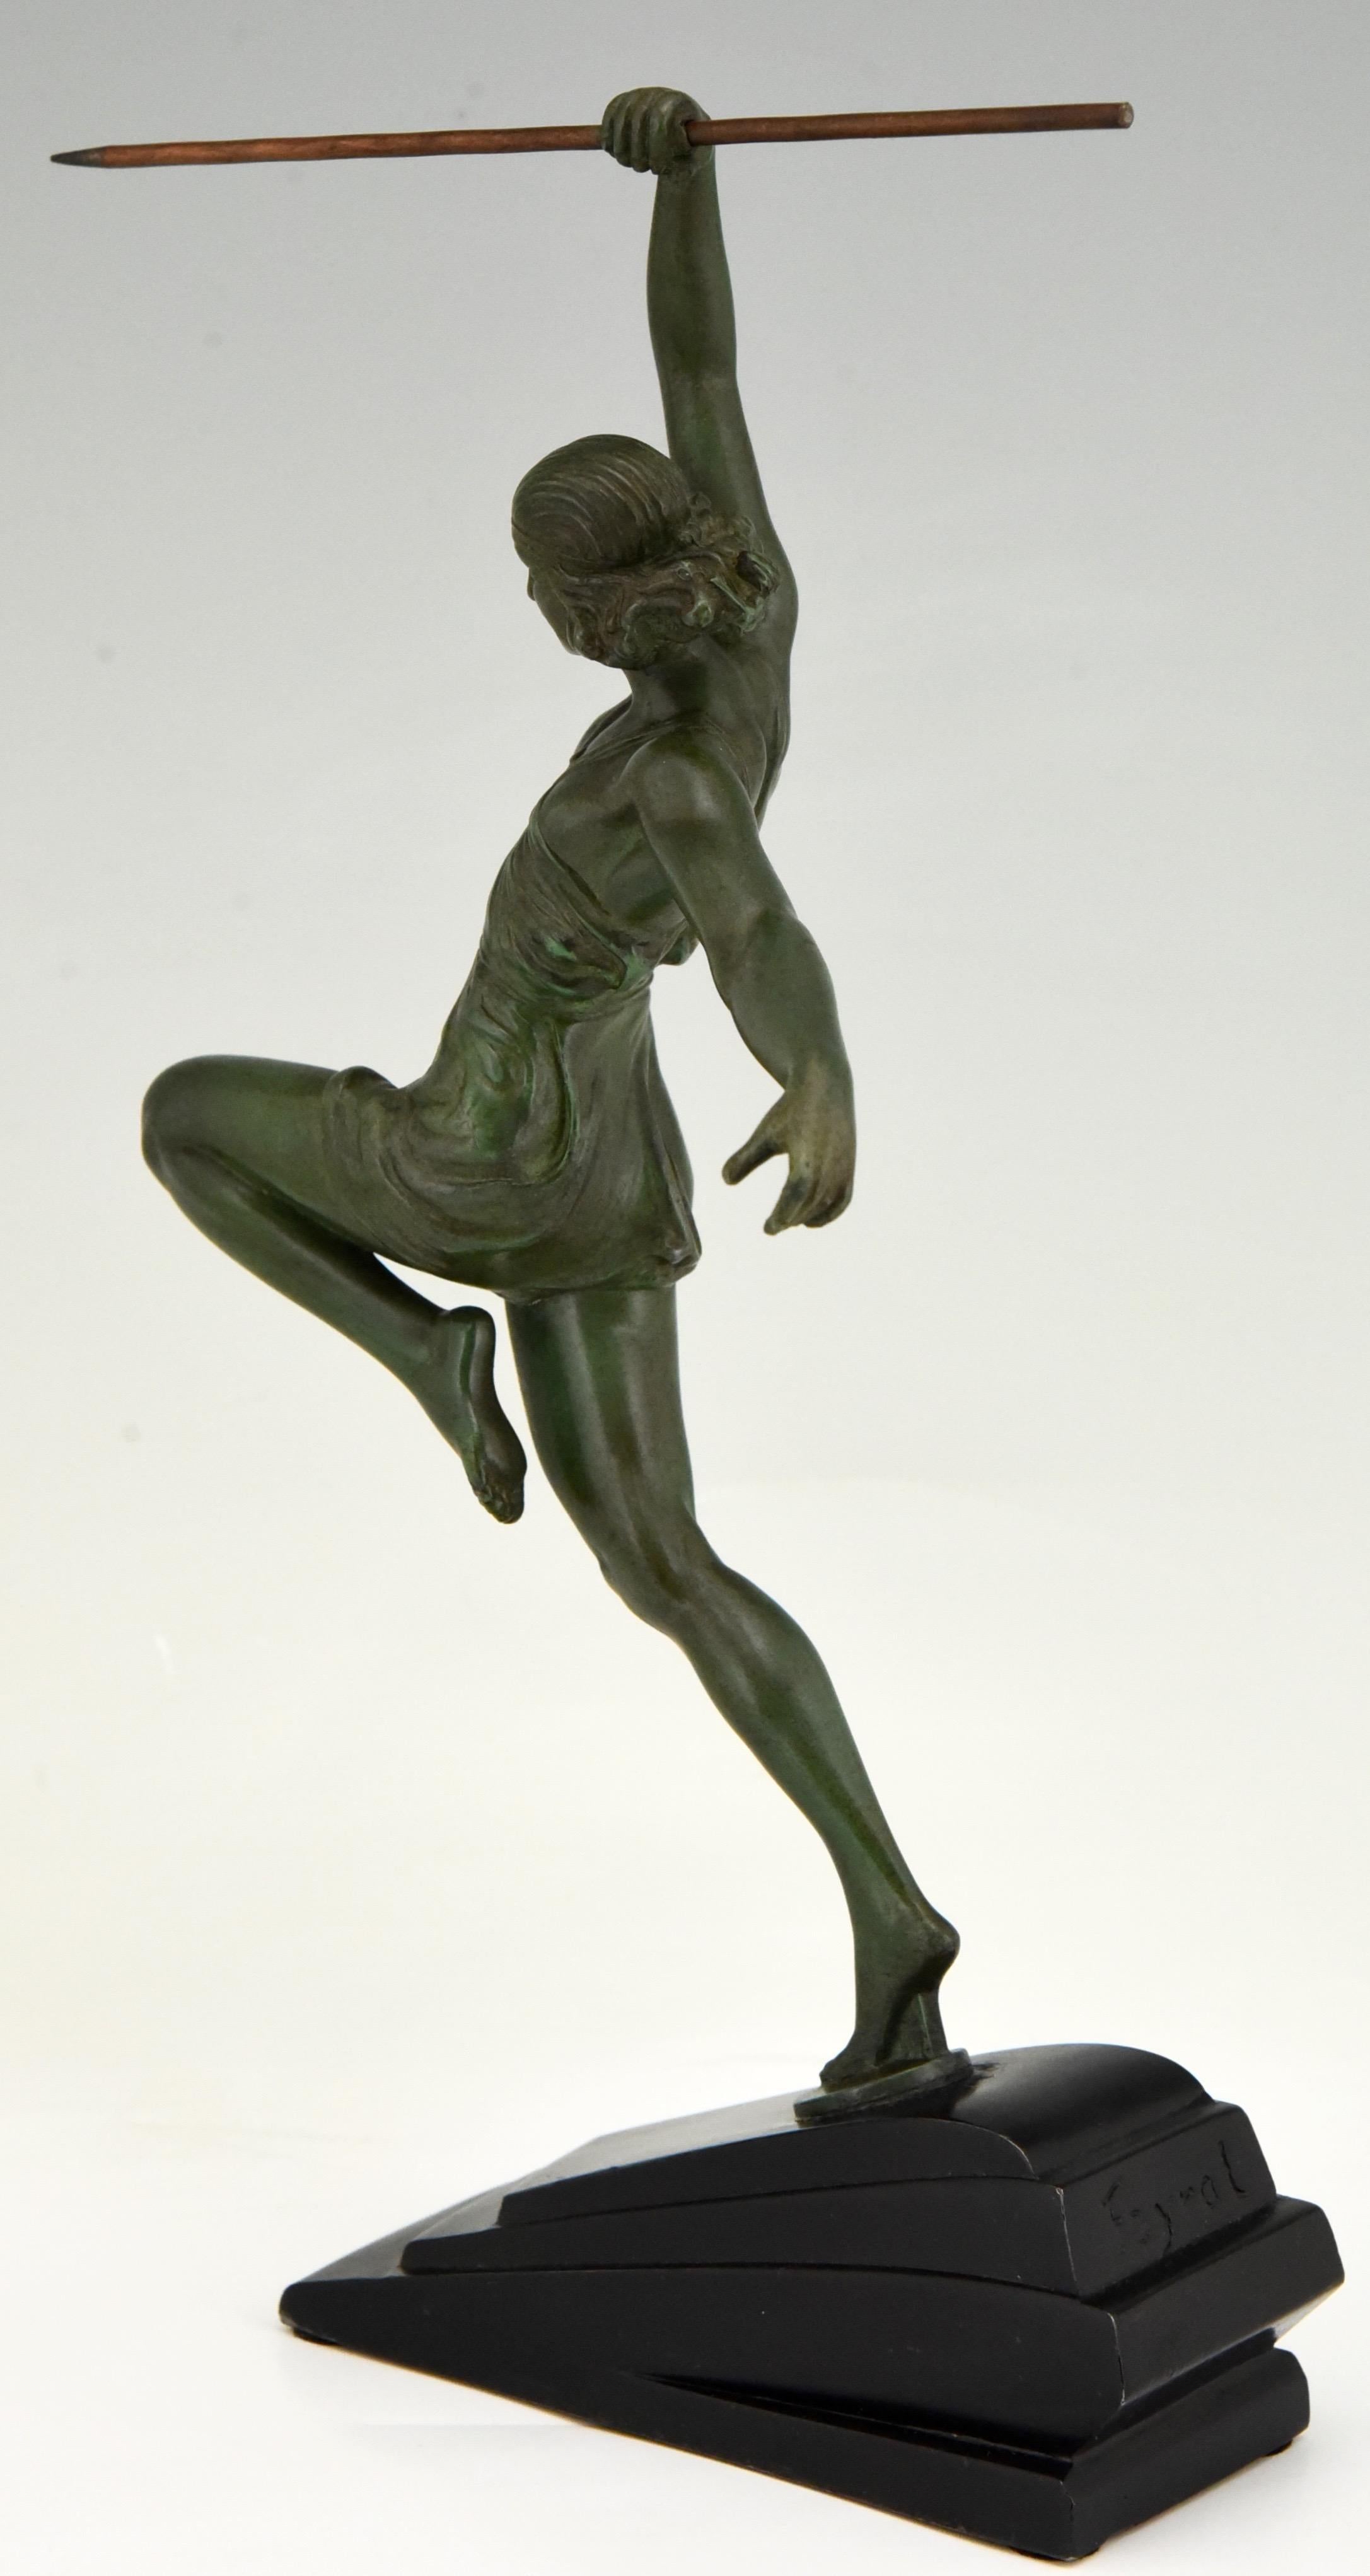 Art Deco Sculpture Javelin Thrower Fayral, Pierre Le Faguays for Le Verrier 1930 2